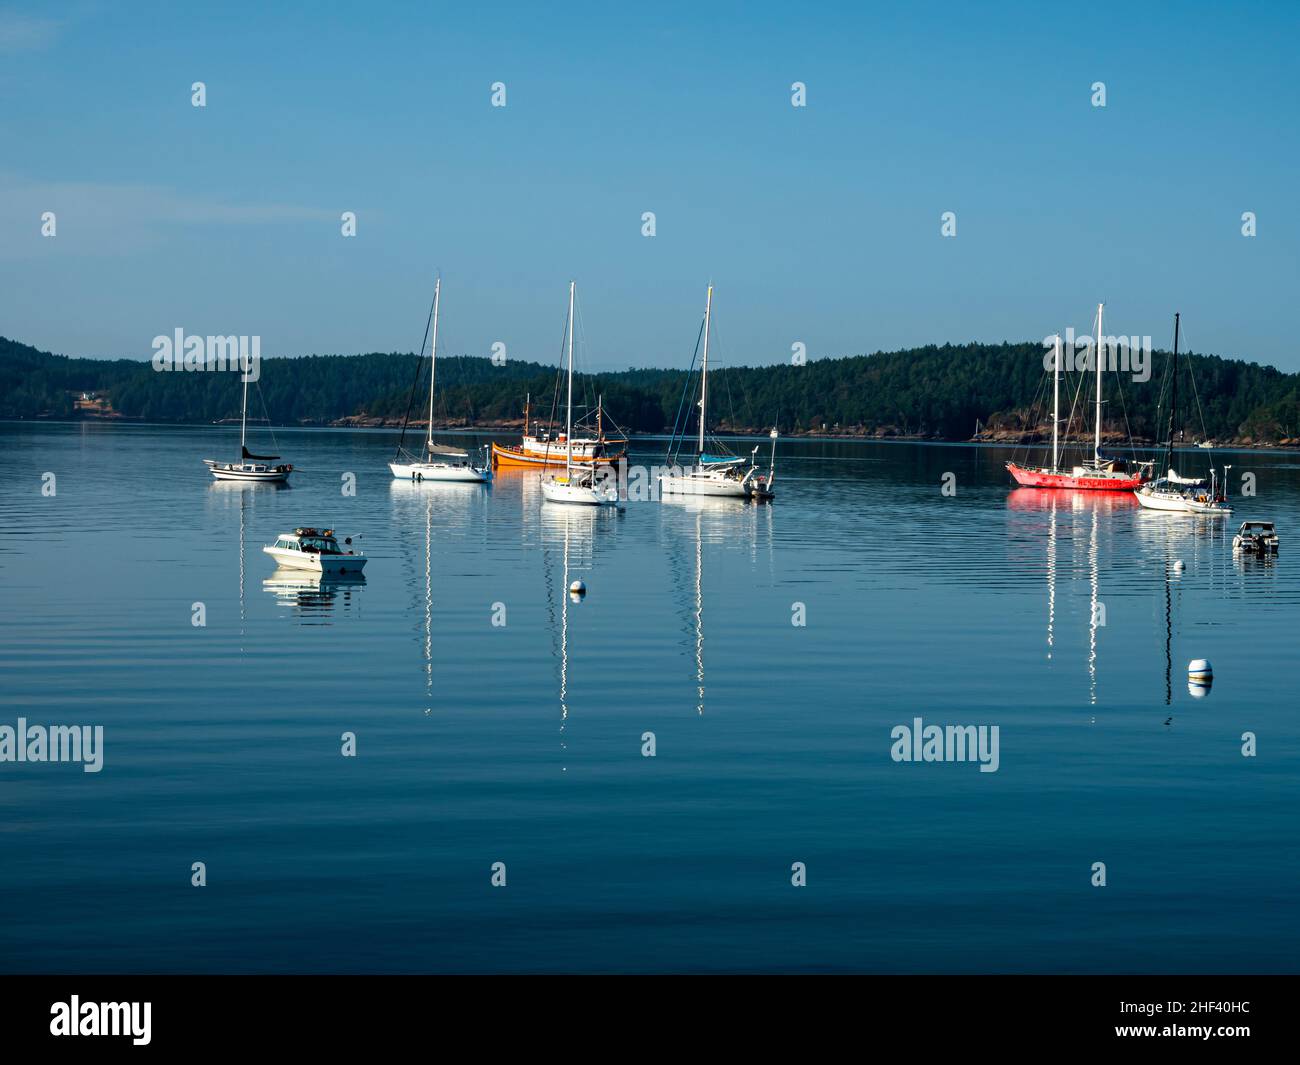 WA21067-00...WASHINGTON - Boats anchored in West Sound on Orcas Island, one of the San Juan Islands. Stock Photo